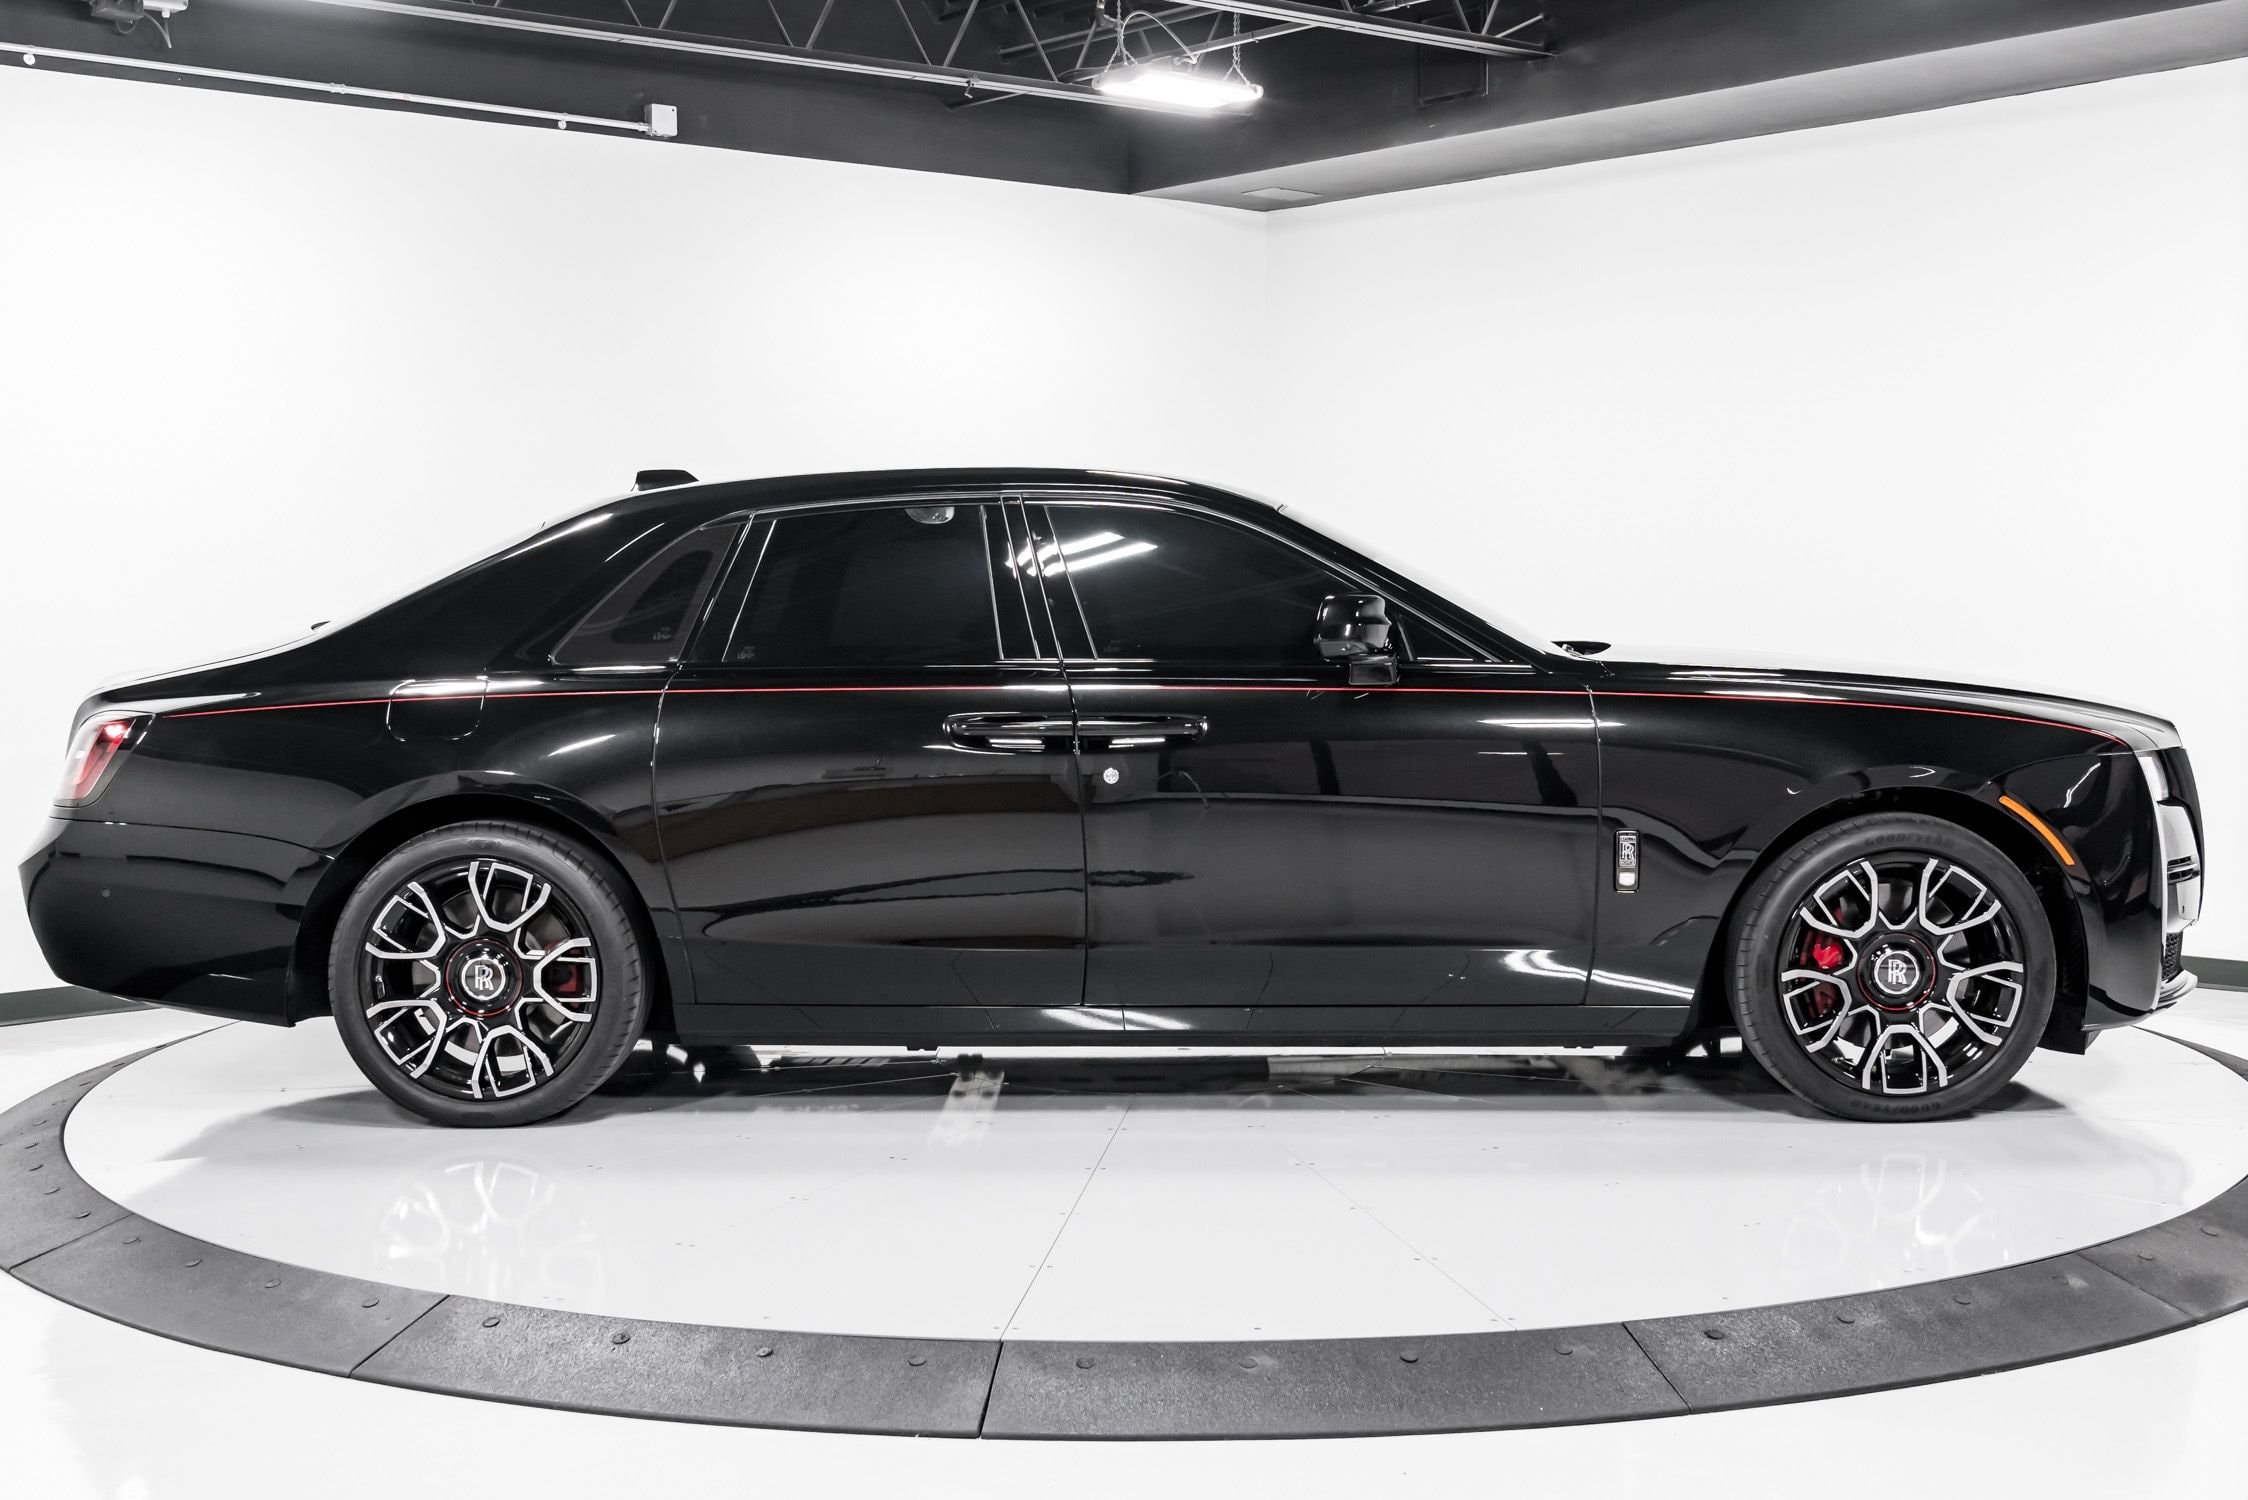 Used 2022 Rolls-Royce Ghost For Sale Richardson,TX | Stock 